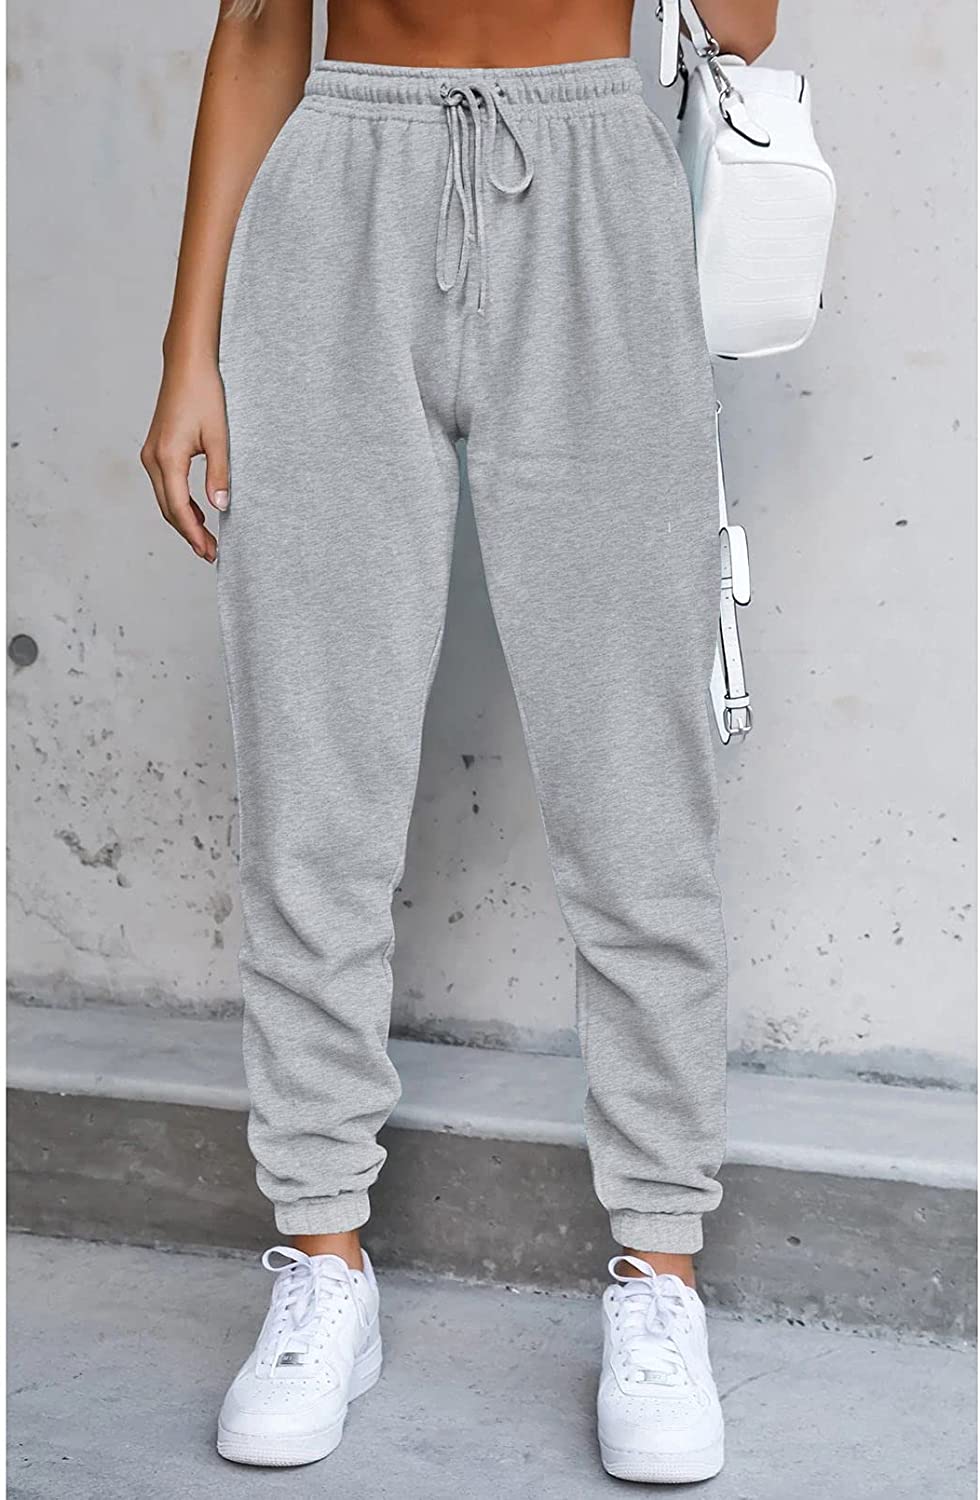 Linsery Women Bra and Sweatpants Sweatsuit Sets Crop Tank Joggers 2 Piece Tracksuit Sport Outfits